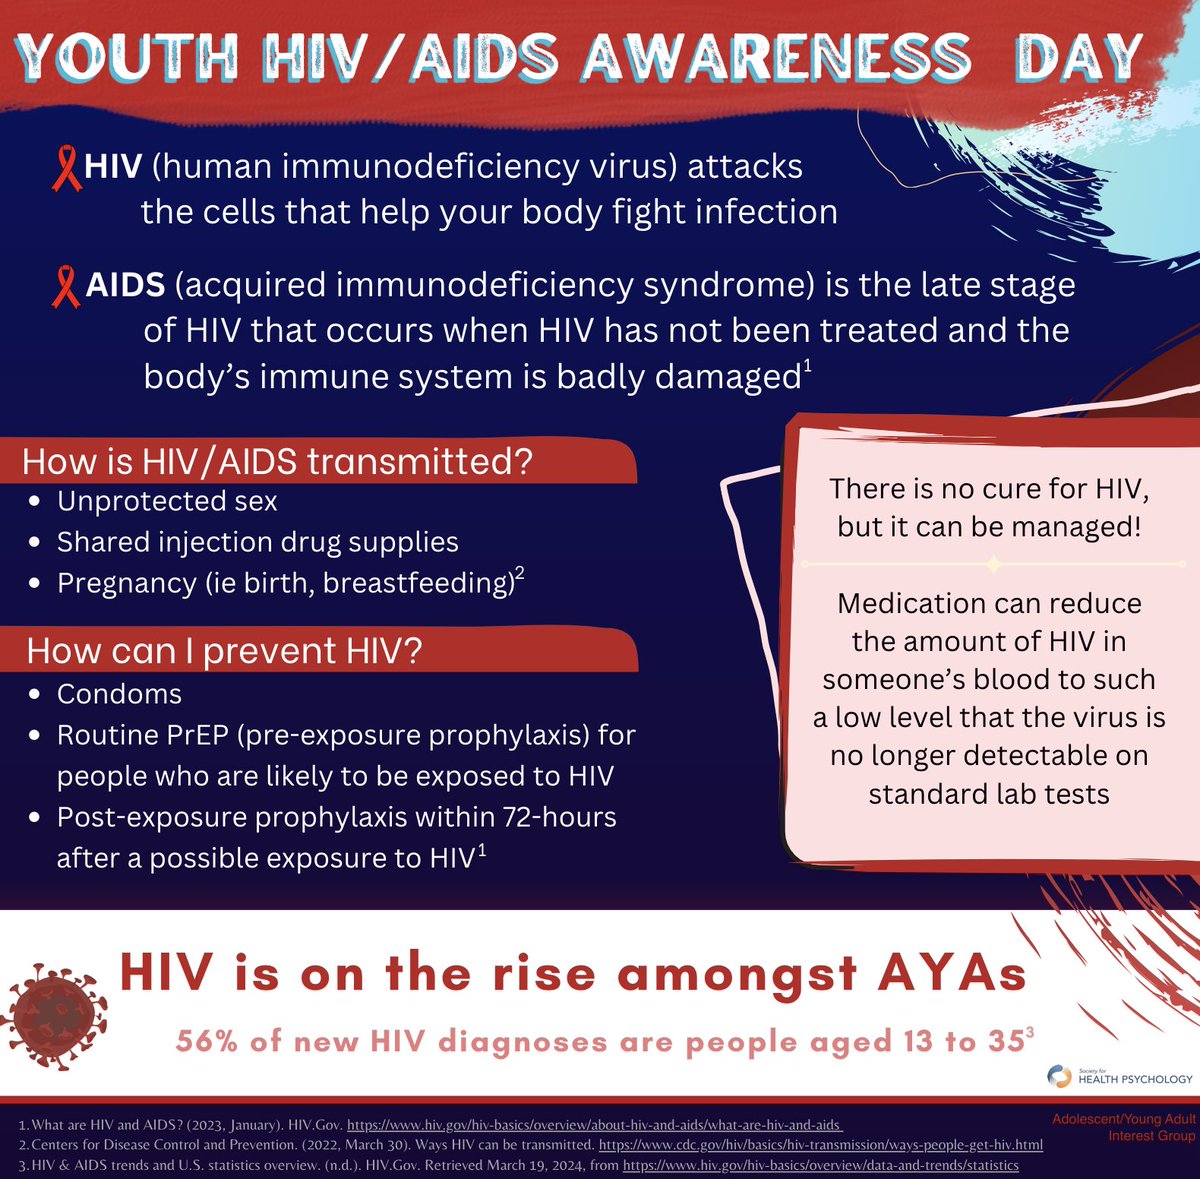 Youth HIV/AIDS awareness day fact sheet: